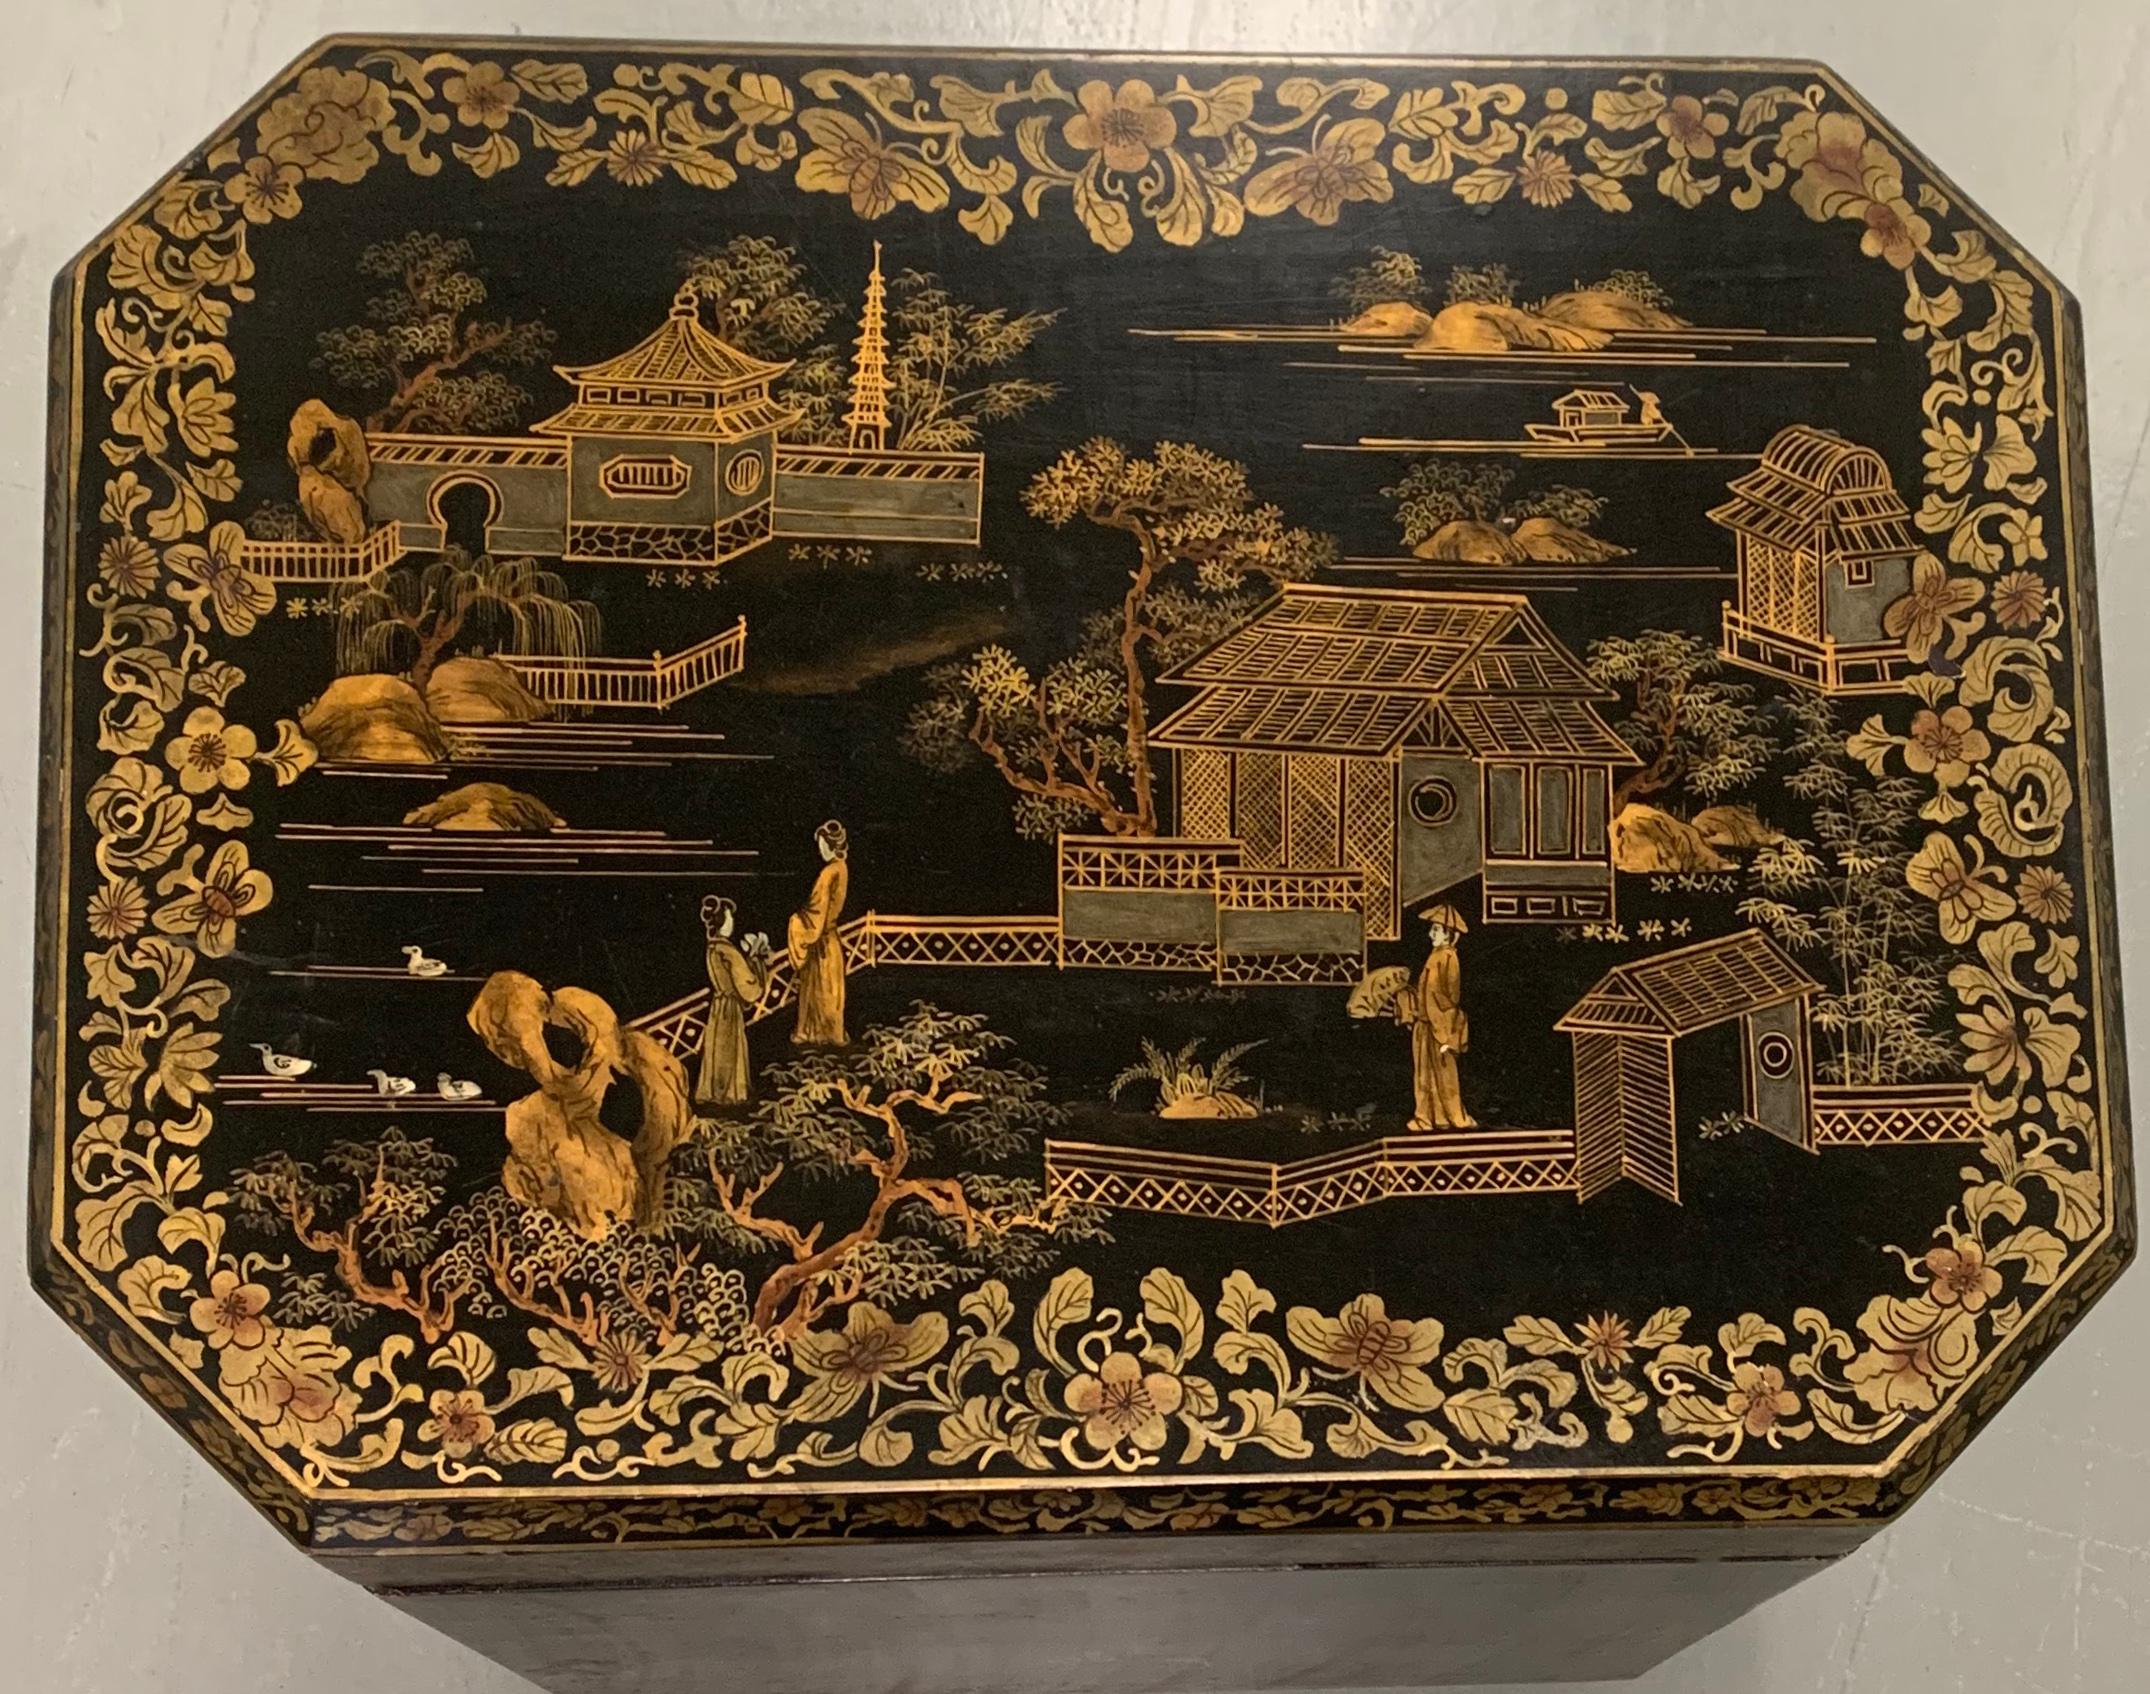 Chinoiserie tea caddy style large side table. Octagonal top. Black painted wood with all over hand painted gold chinoiserie motif. Very solid well built piece. Made in Hong Kong. 
Would also work well as a blanket chest at the foot of a bed or